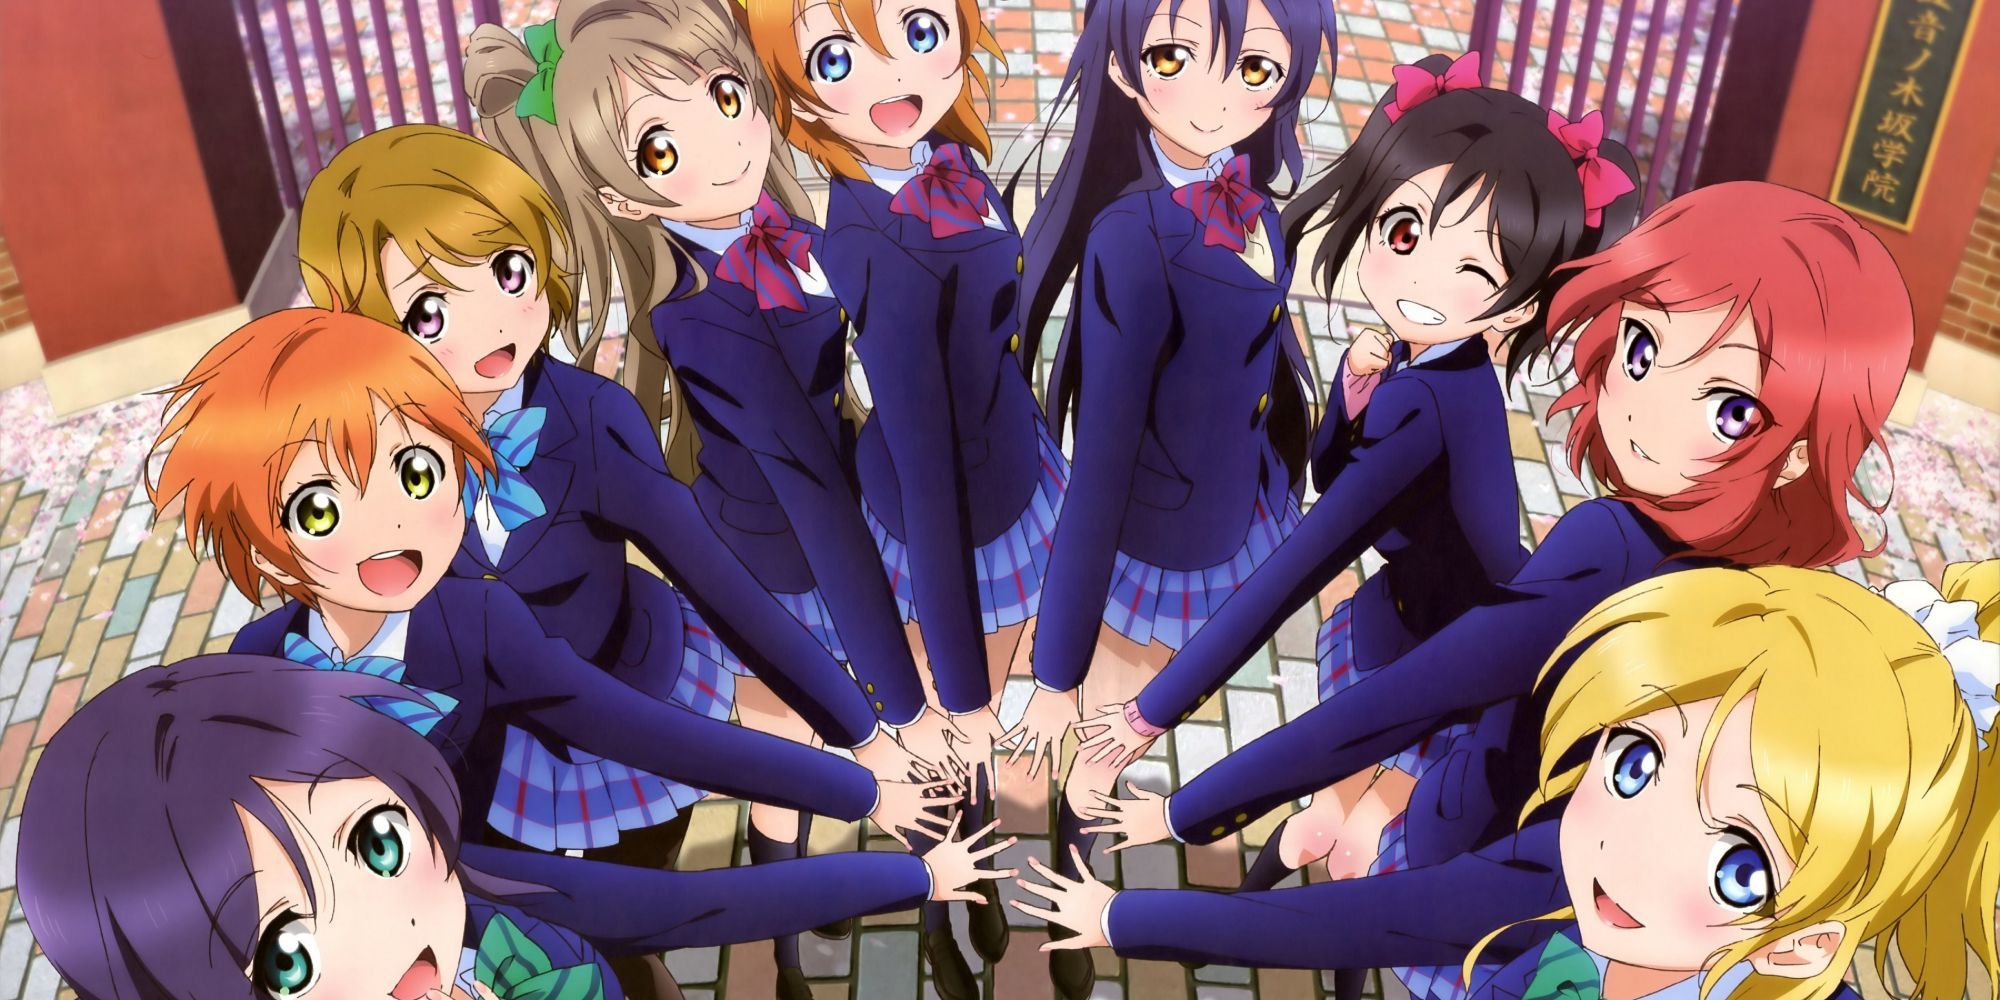 Nine characters from Love Live! School Idol Project anime putting their hands together